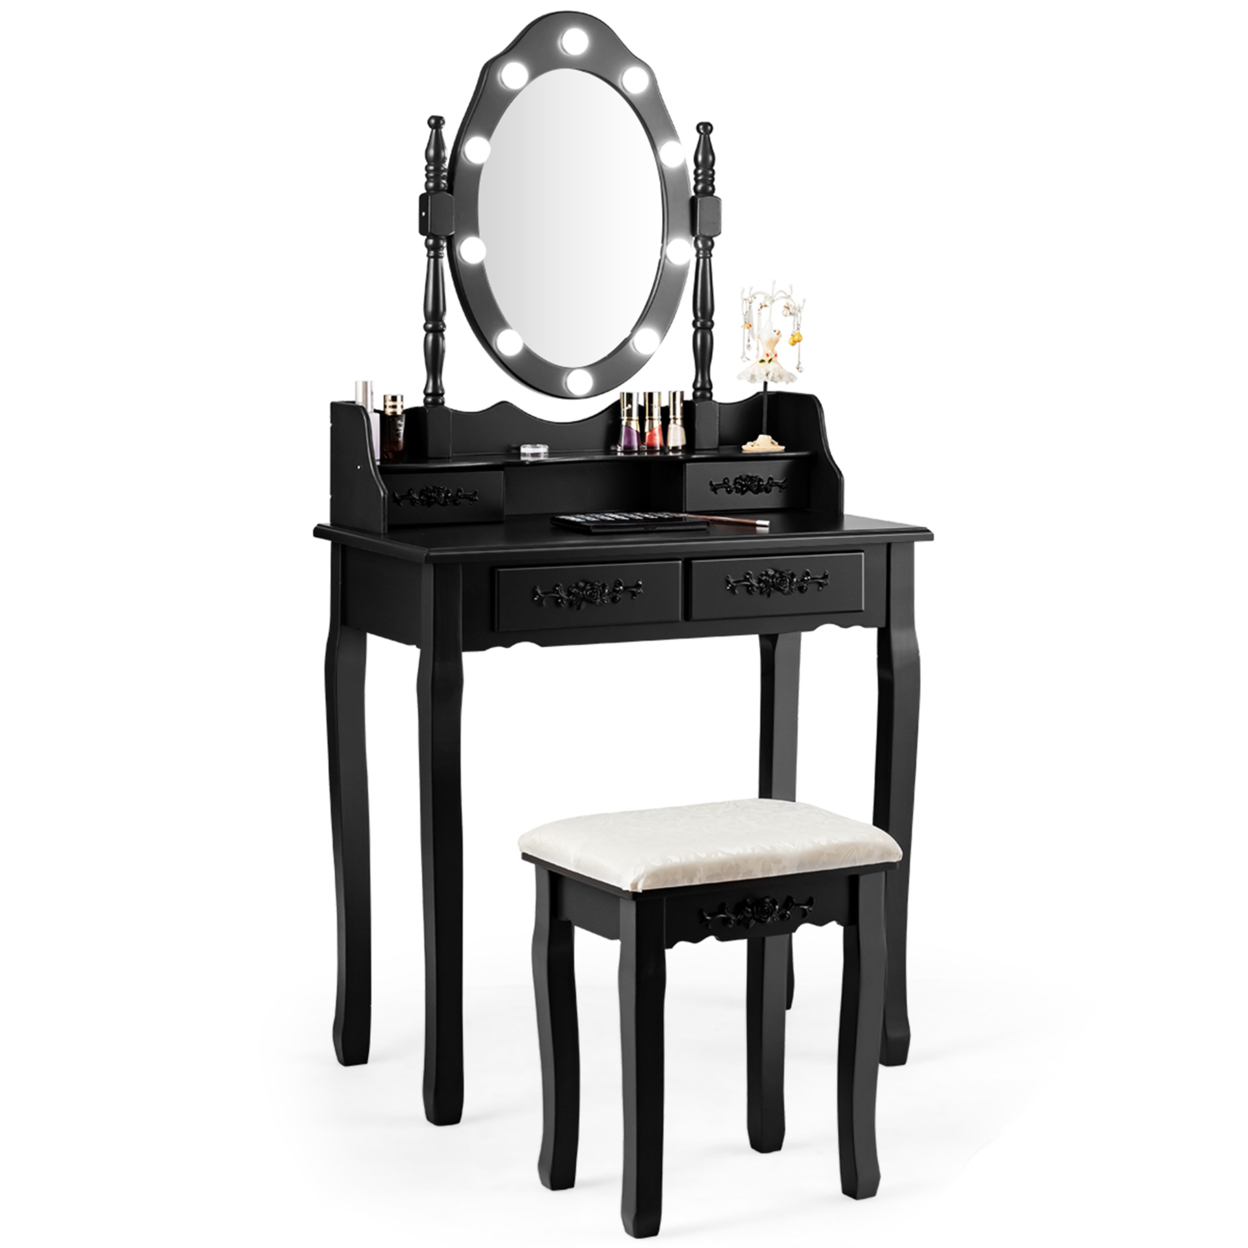 Makeup Vanity Dressing Table Set W/10 Dimmable Bulbs Cushioned Stool - Black